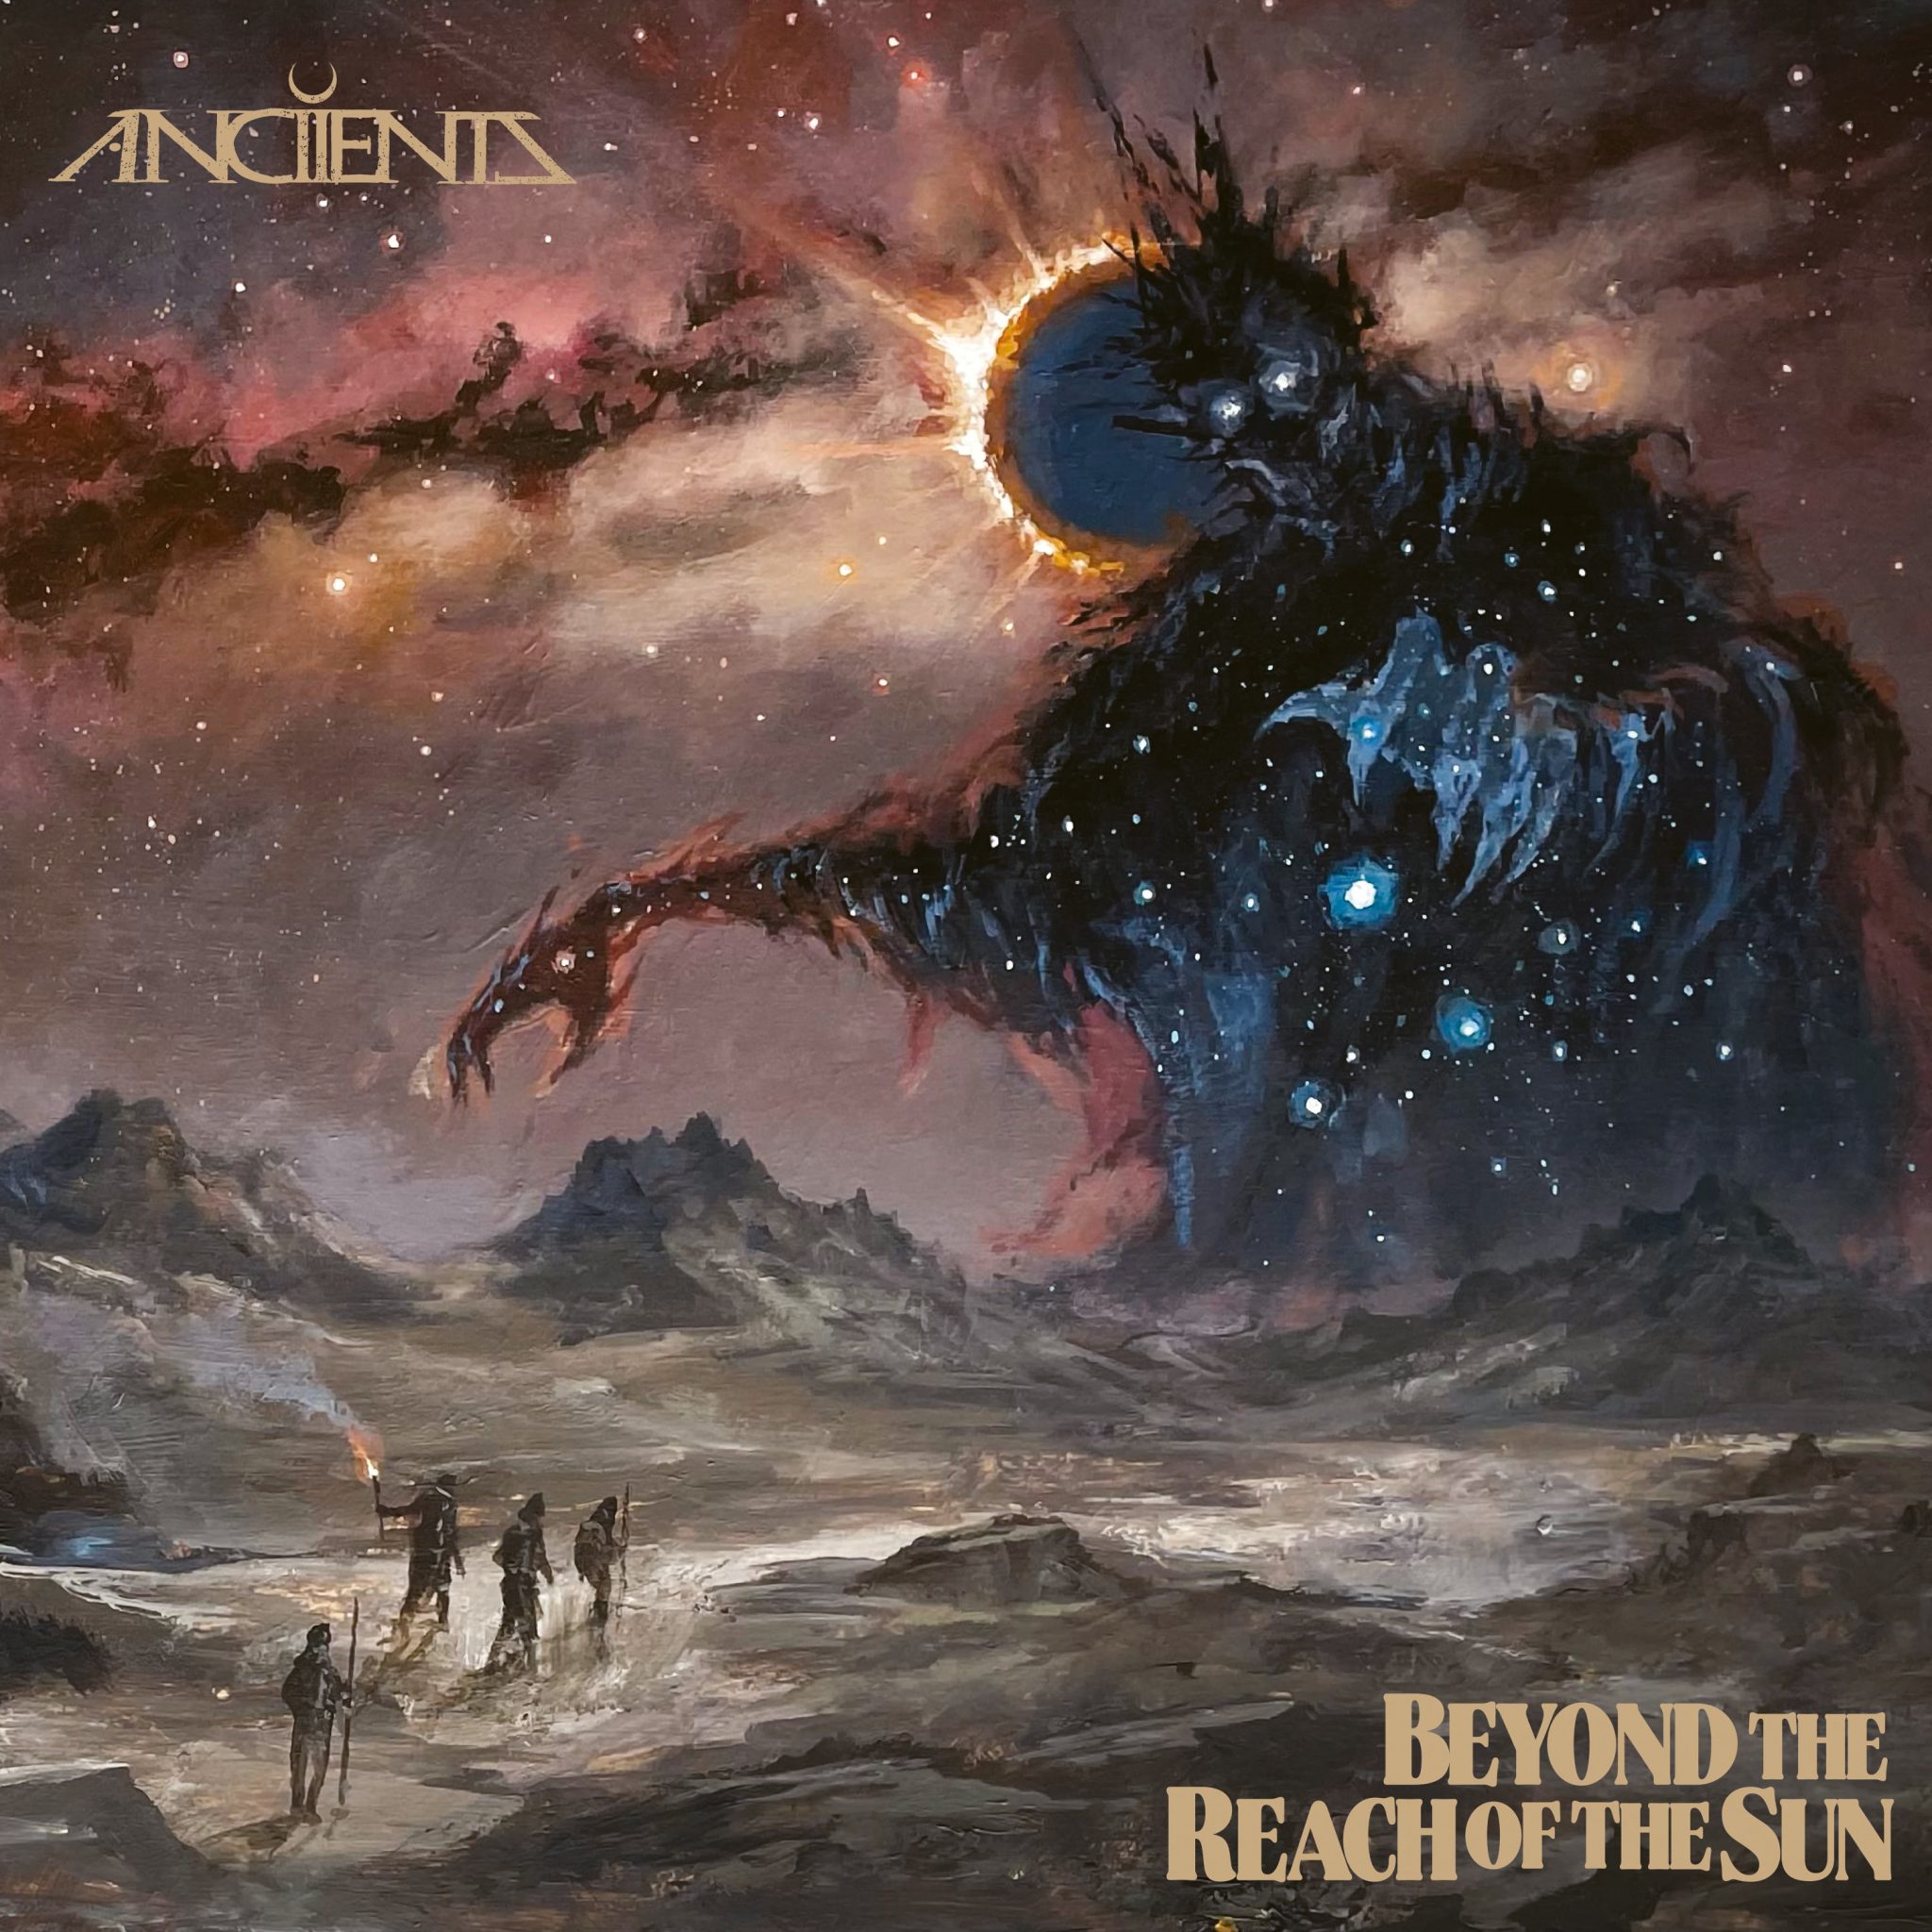 Anciients beyond the reach of the sun